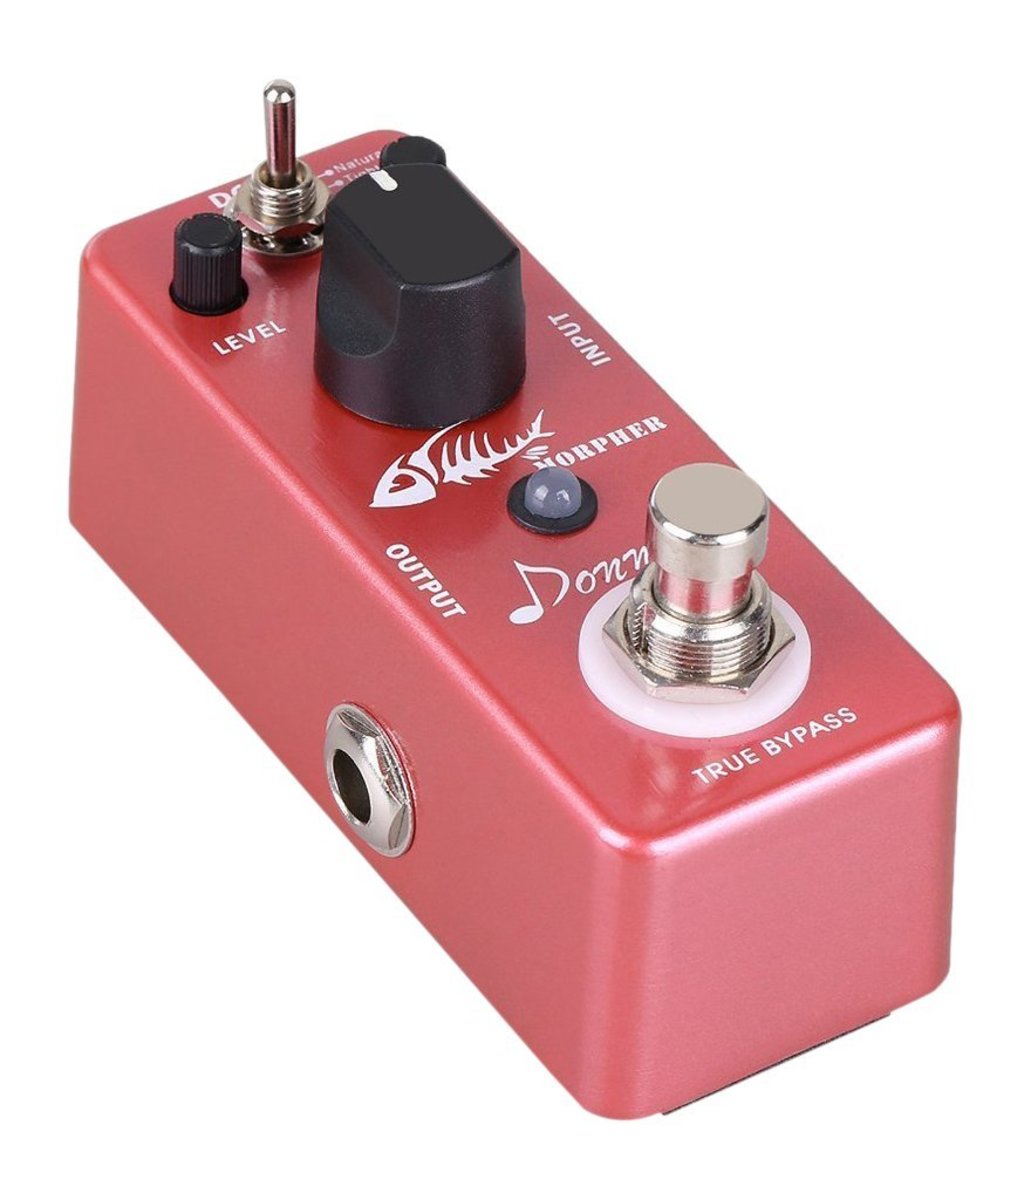 The Donner Morpher Distortion Pedal is compact and sturdy.